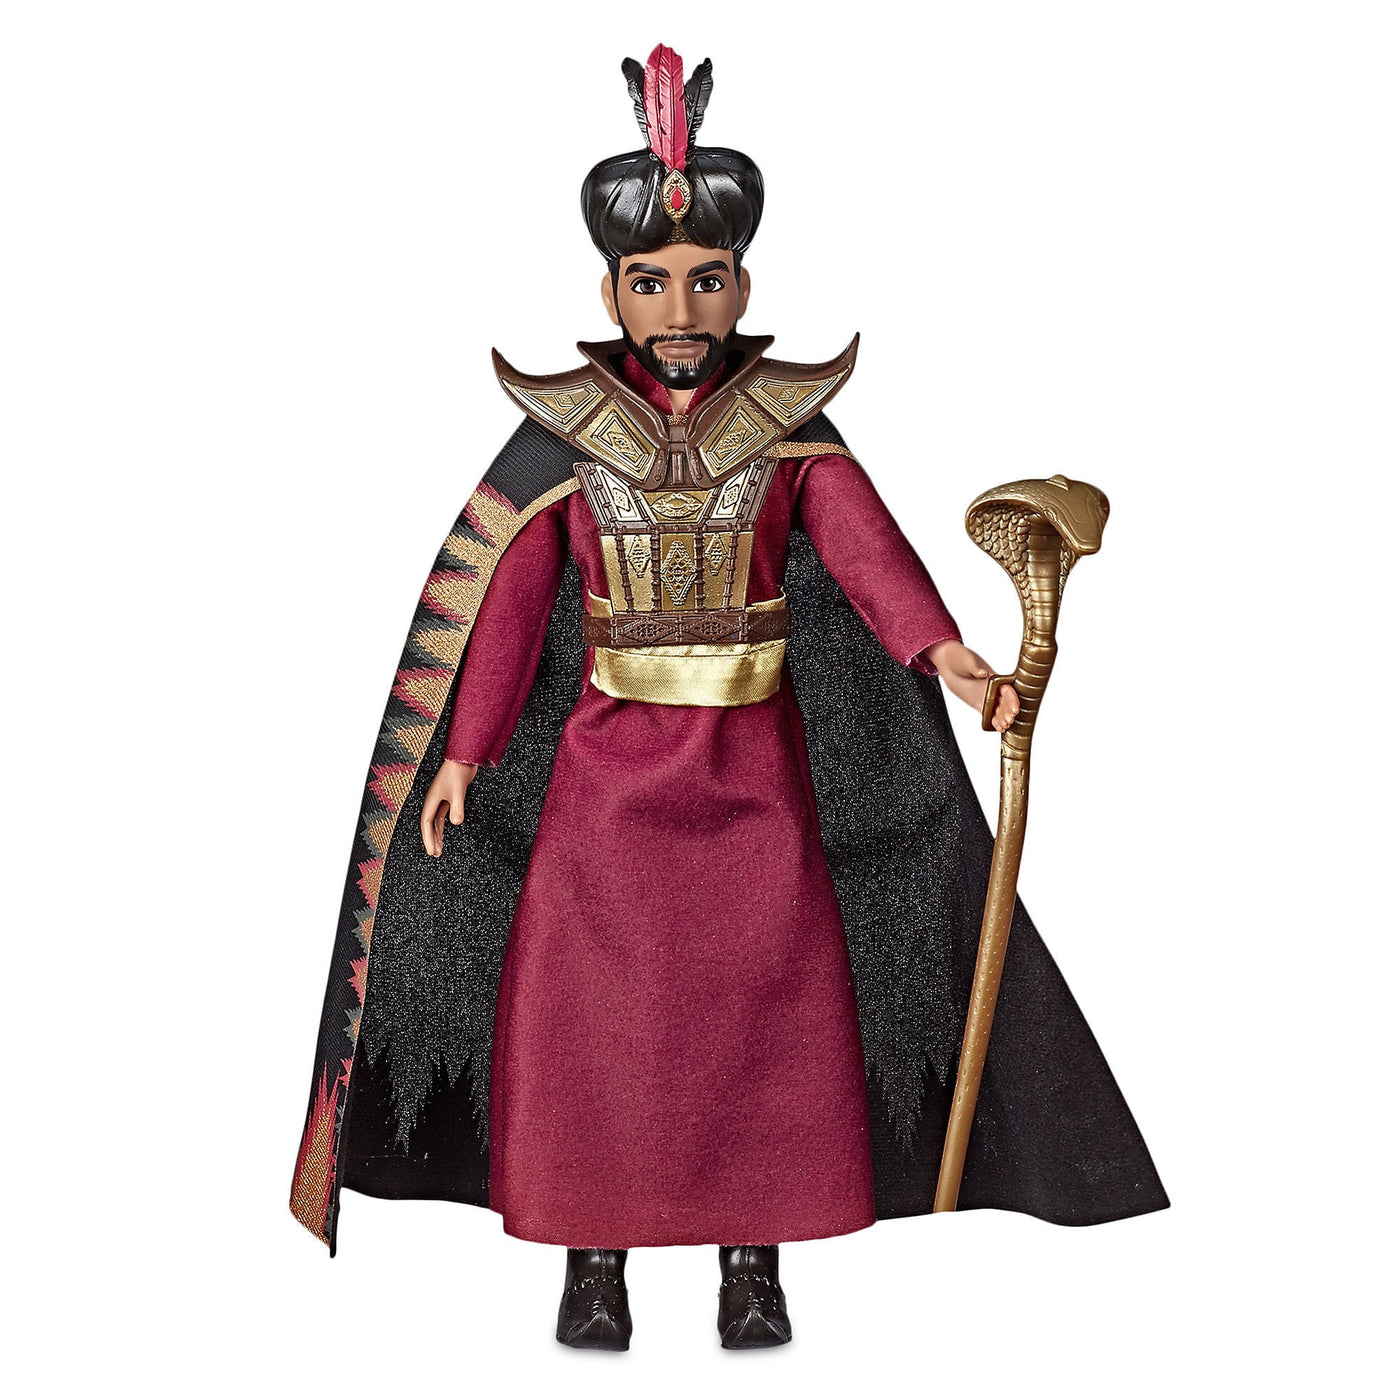 Disney Live Action Film Jafar from Aladdin Fashion Doll by Hasbro New with Box